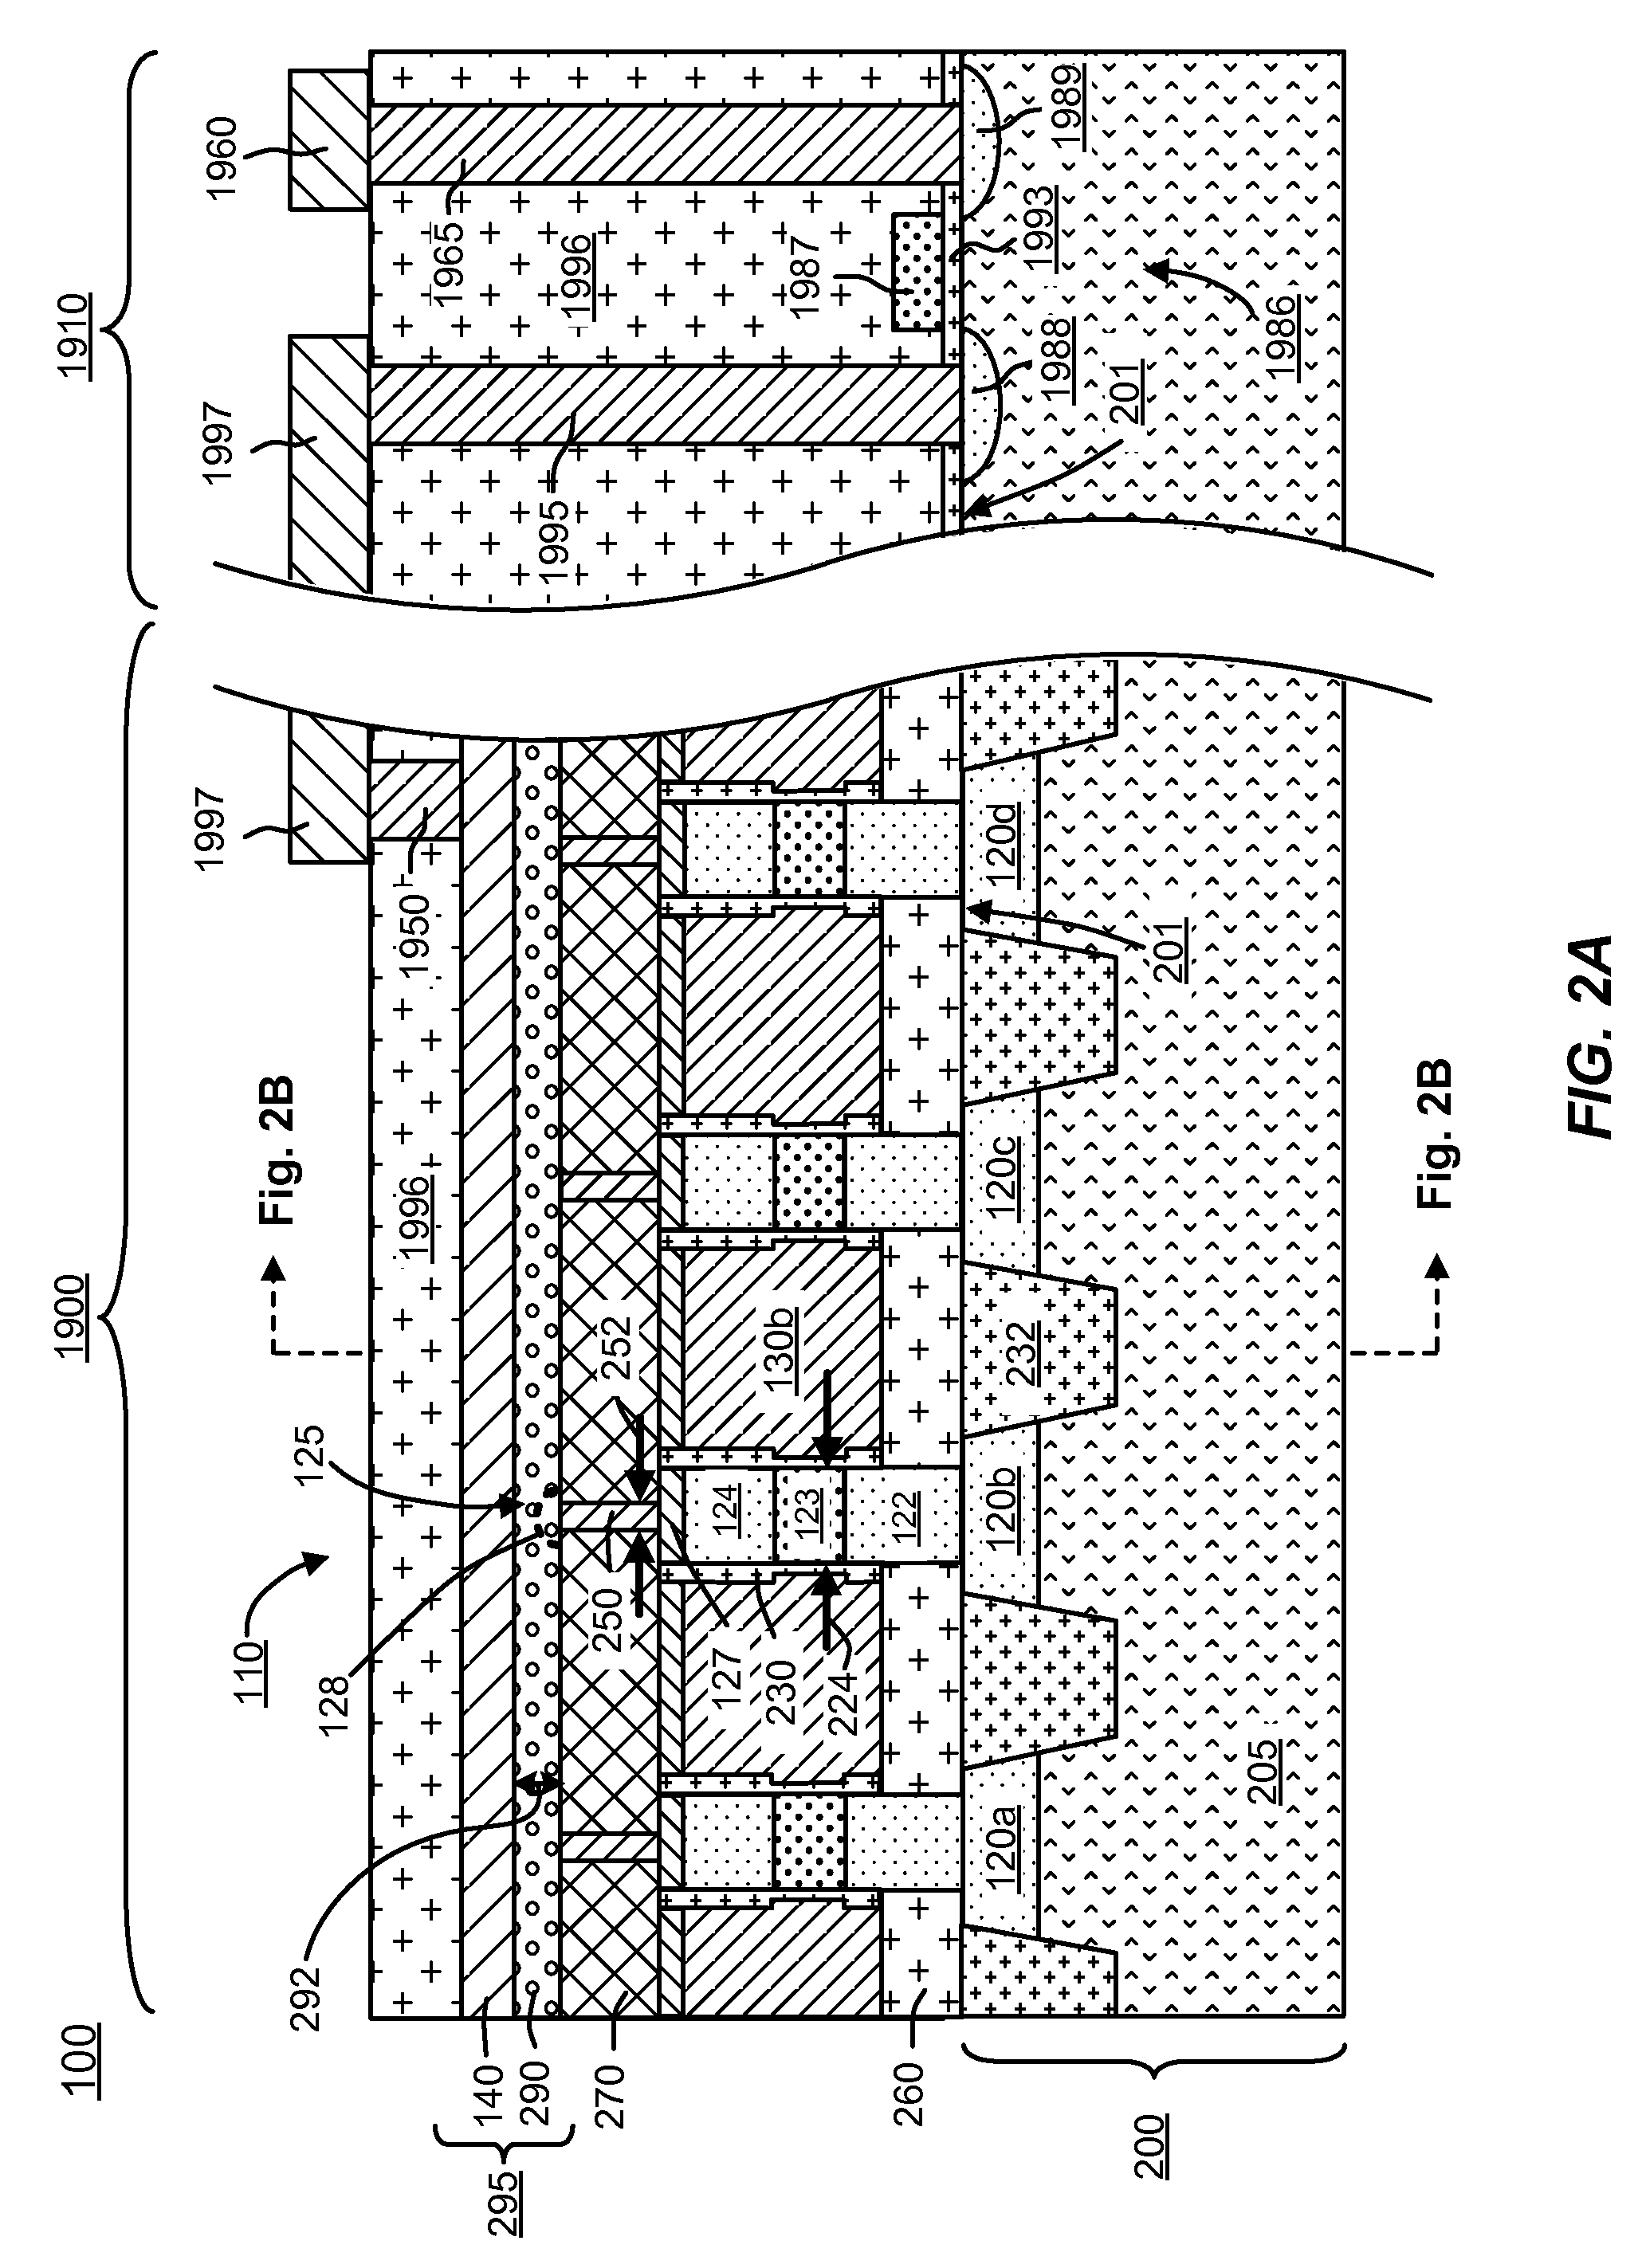 Phase Change Memory Cell Having Vertical Channel Access Transistor